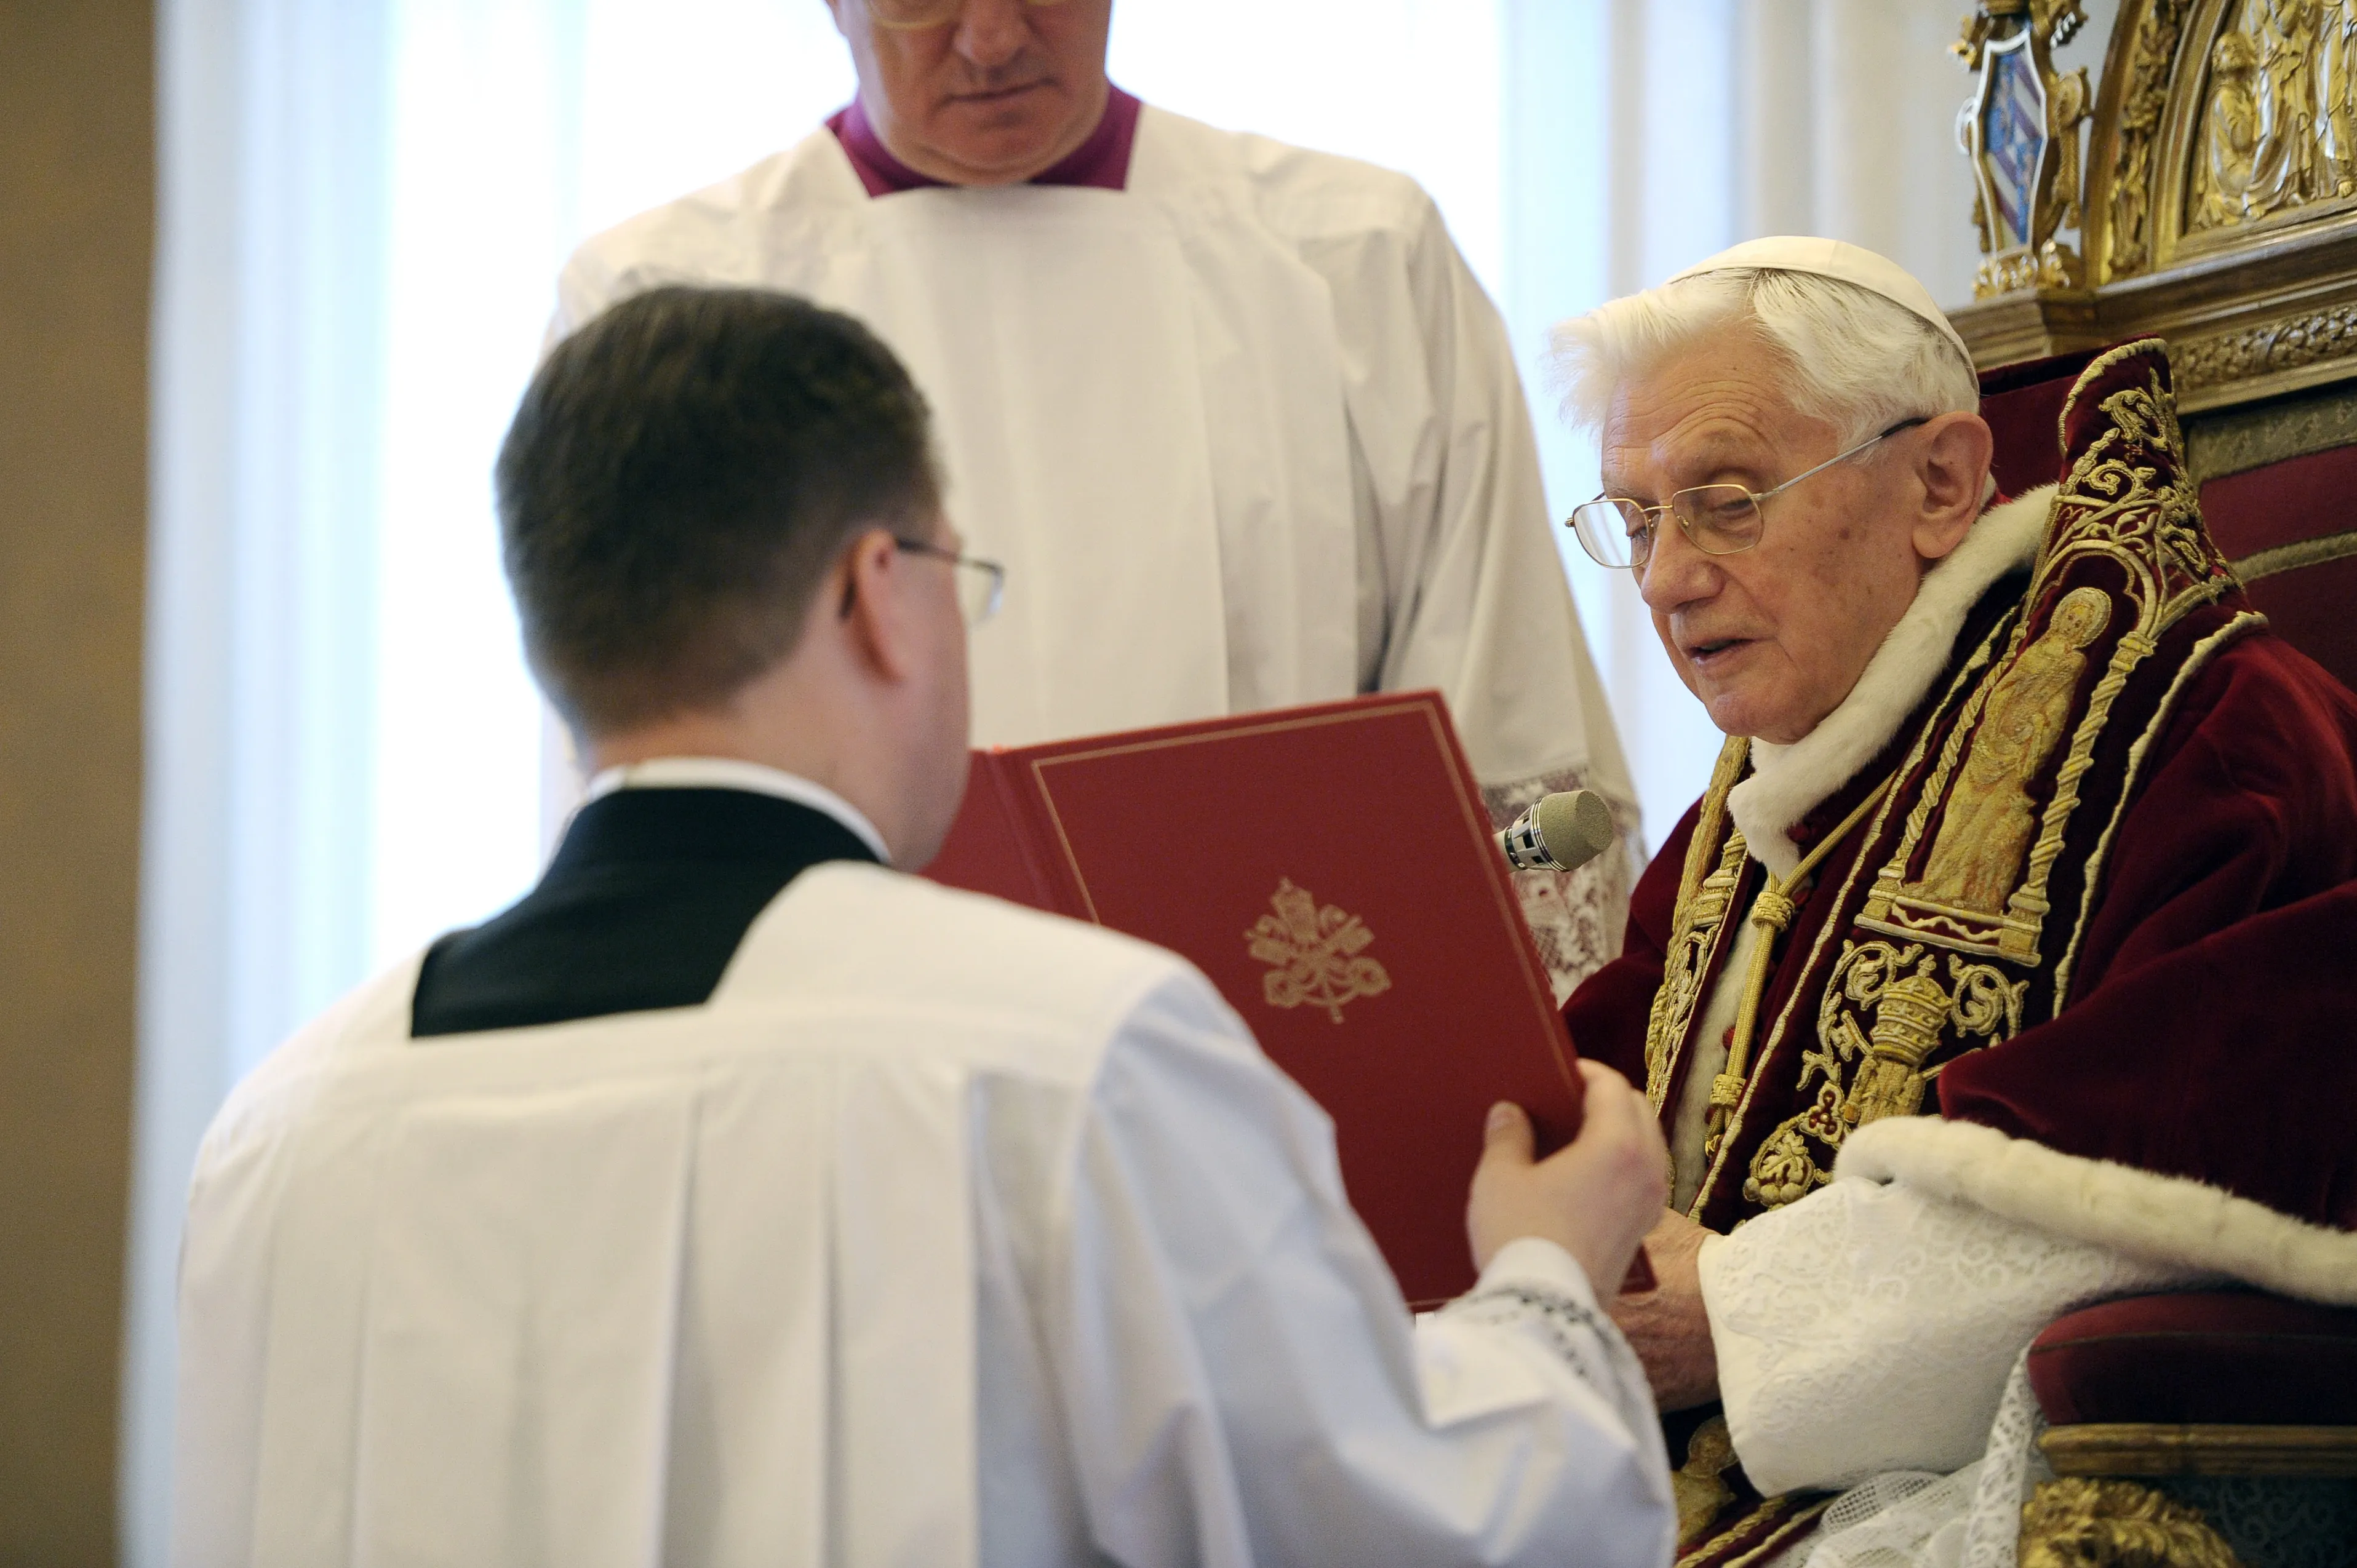 In down, Benedict XVI carved new role as 'contemplative' pope Catholic News Agency